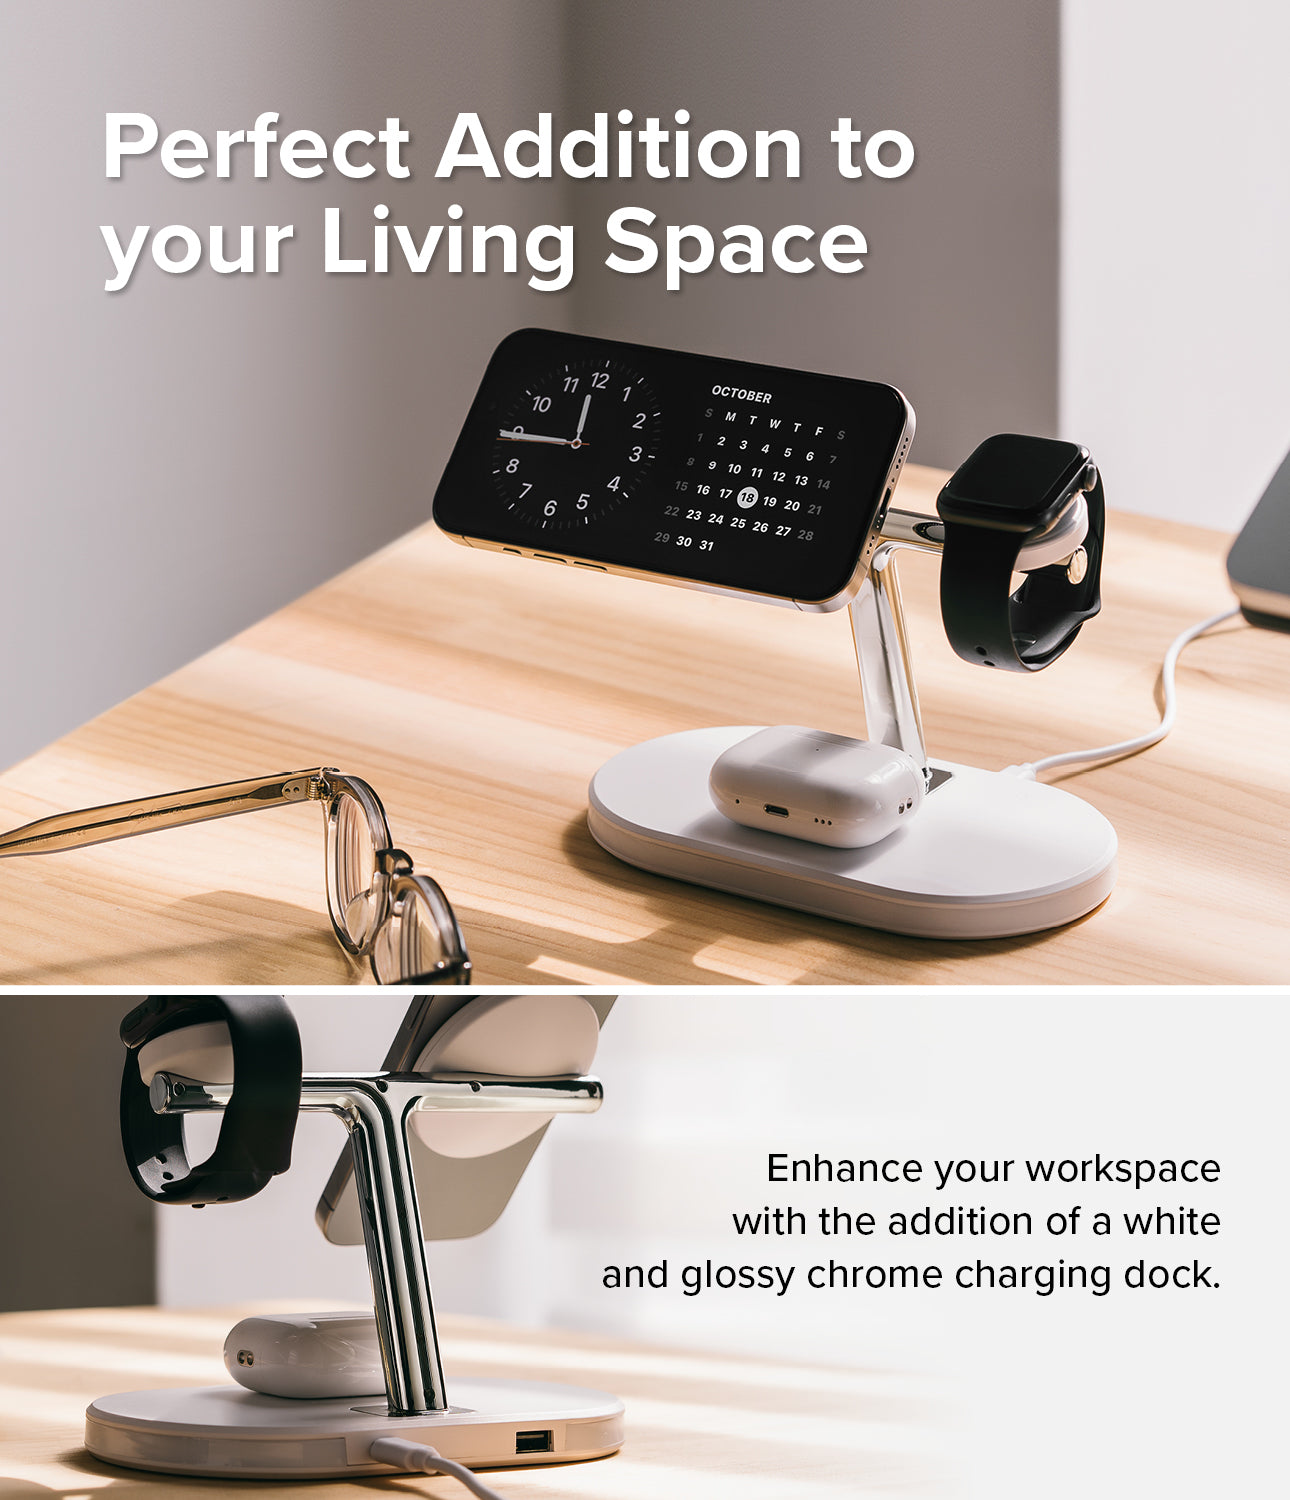 Ringke 3-in-1 Wireless Charger Stand - Perfect Addition to your Living Space. Enhance your workspace with the addition of a white and glossy chrome charging dock.